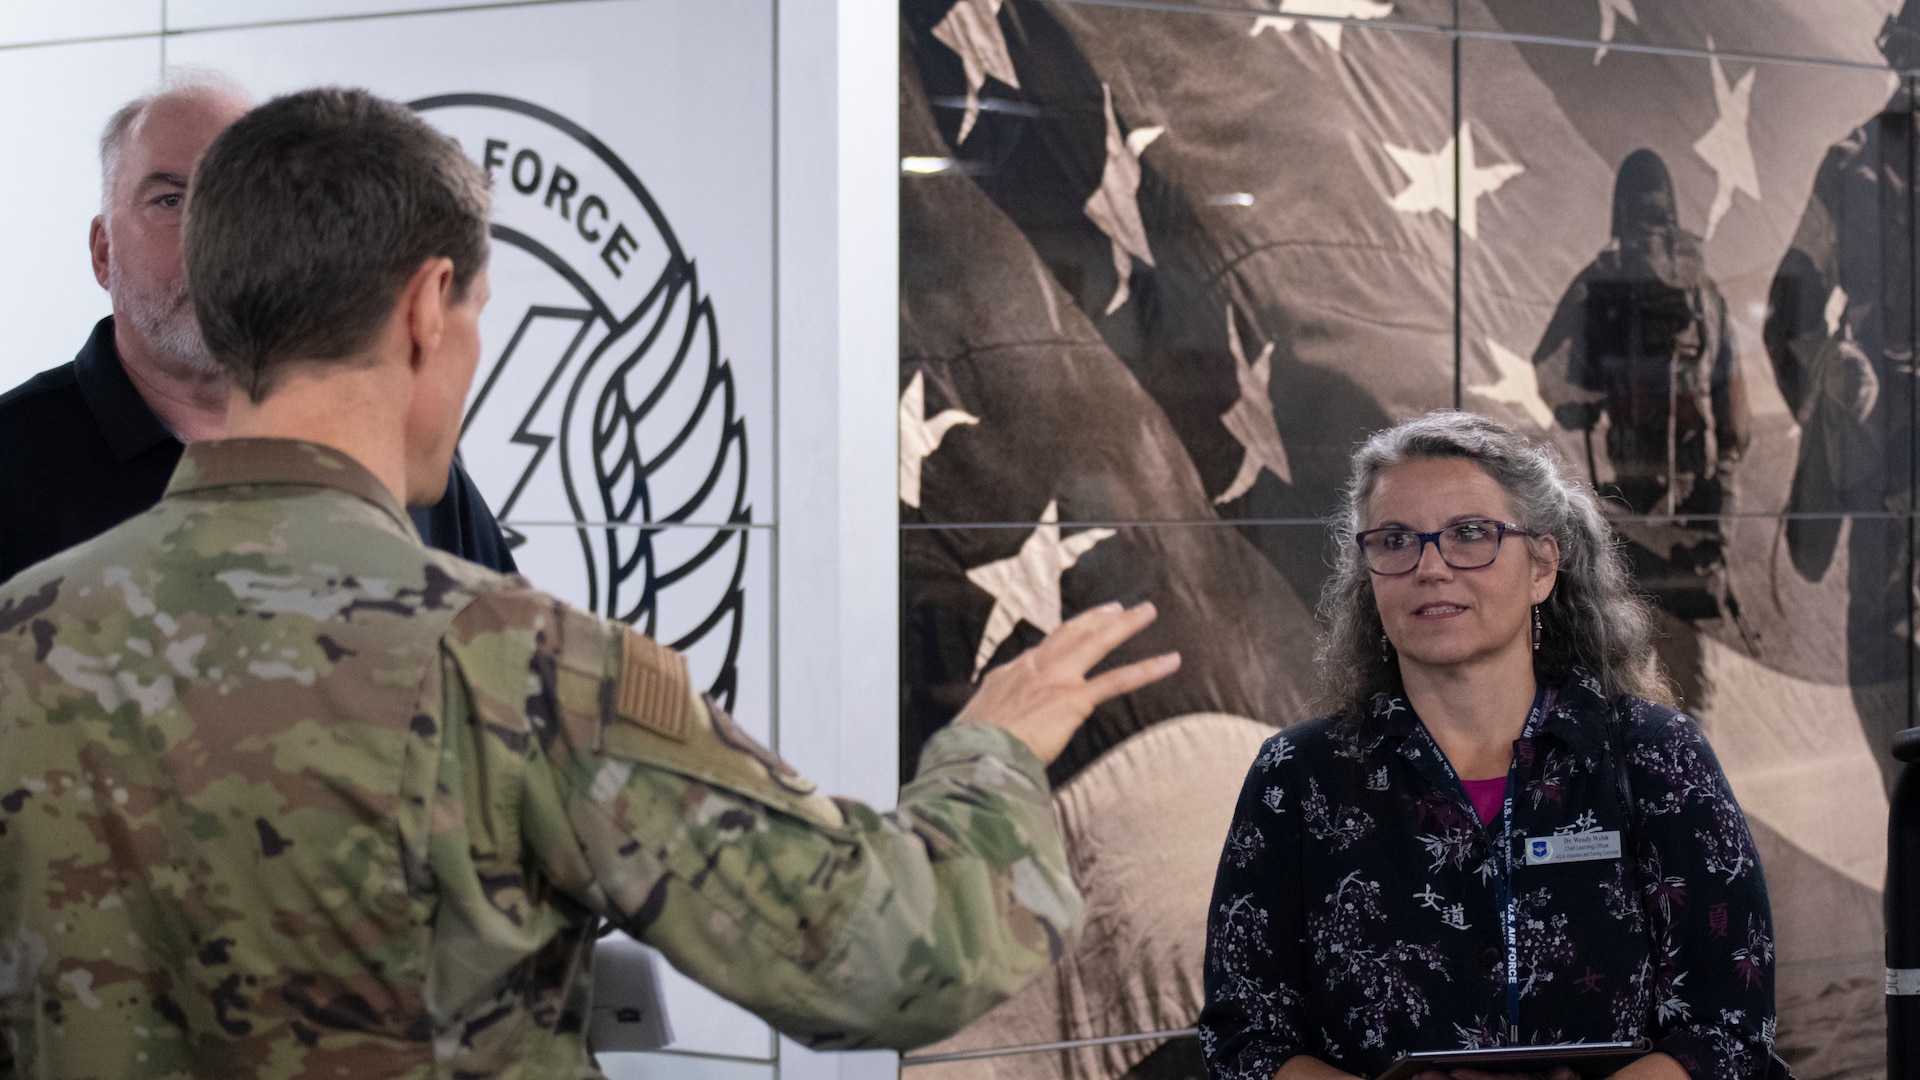 U.S. Air Force Col George Buse (left), Special Warfare Human Performance Support Group commander, briefs Dr. Wendy Walsh (right), Air Education and Training Command chief learning officer, on how members of the Special Warfare Training Wing leverage cutting-edge human performance technology at the SWTW interim Human Performance Training Center at Joint Base San Antonio-Chapman Training Annex, Texas, April 5, 2022. Walsh and her team participated in an immersion tour of the SWTW to learn about how the SWTW builds Air Force Special Warfare Airmen and prepares them for combat.